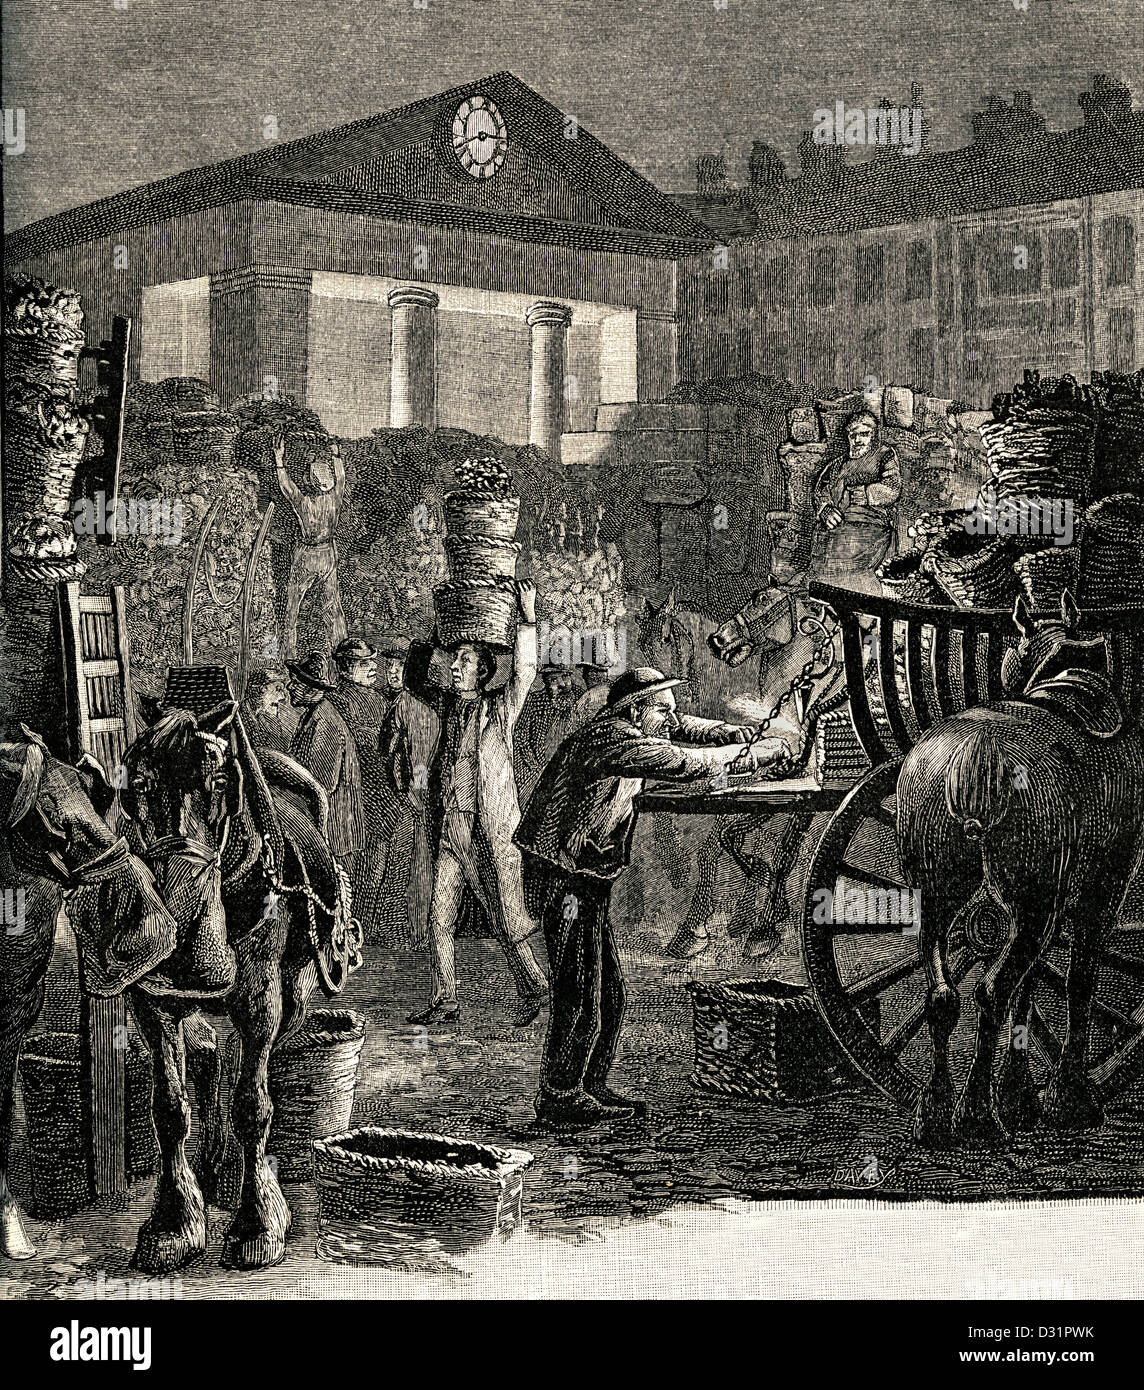 Historic Black and White etching illustration of Covent Garden market at night in the early 1800's Stock Photo